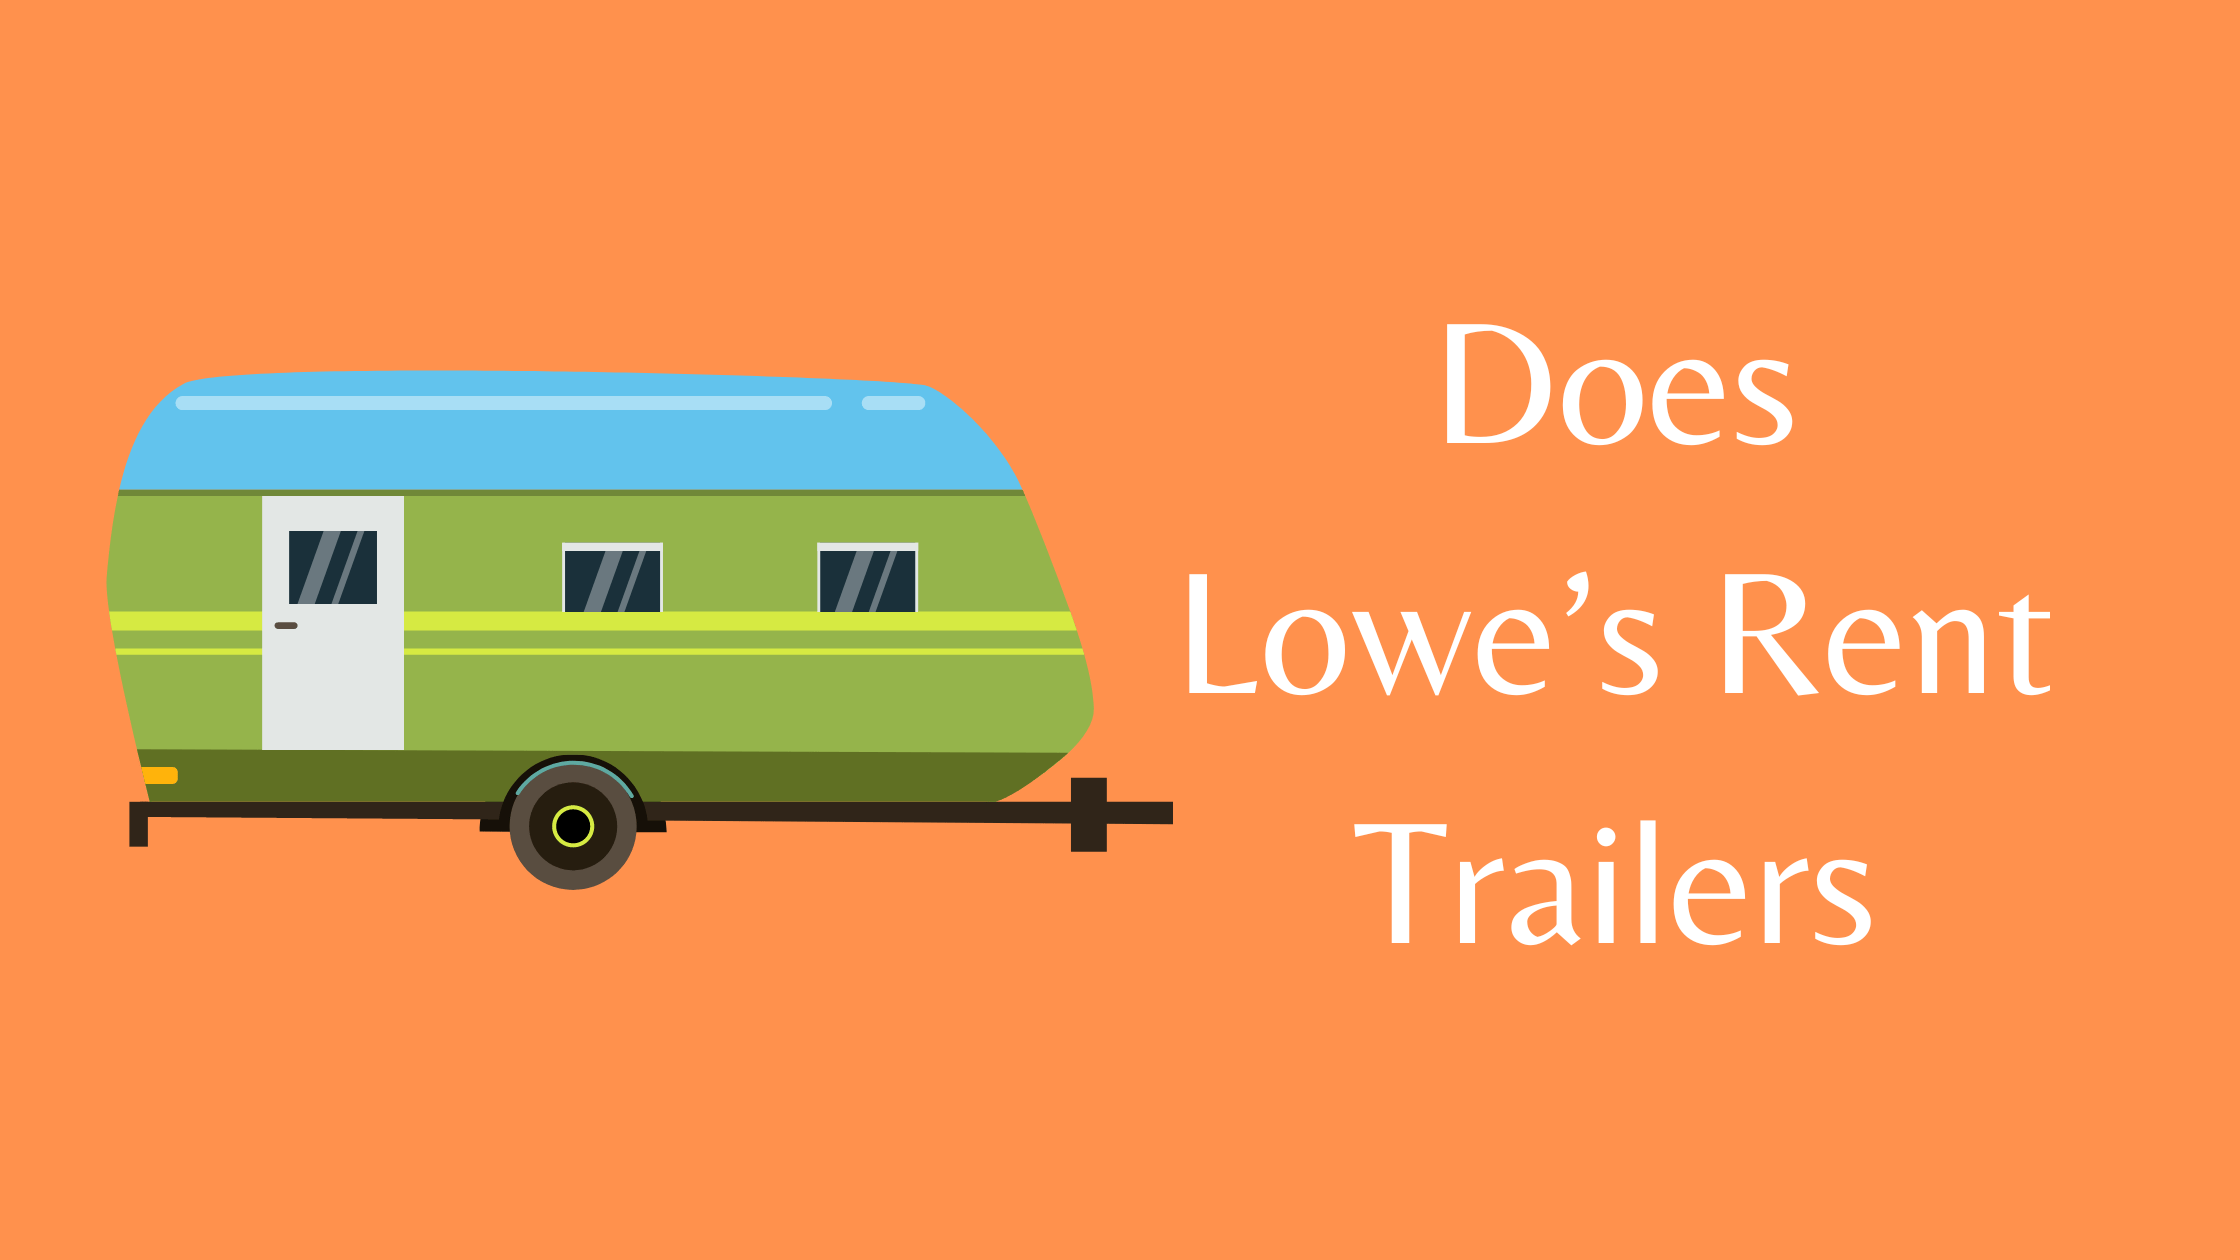 Does Lowe’s Rent Trailers? Full Guide On It